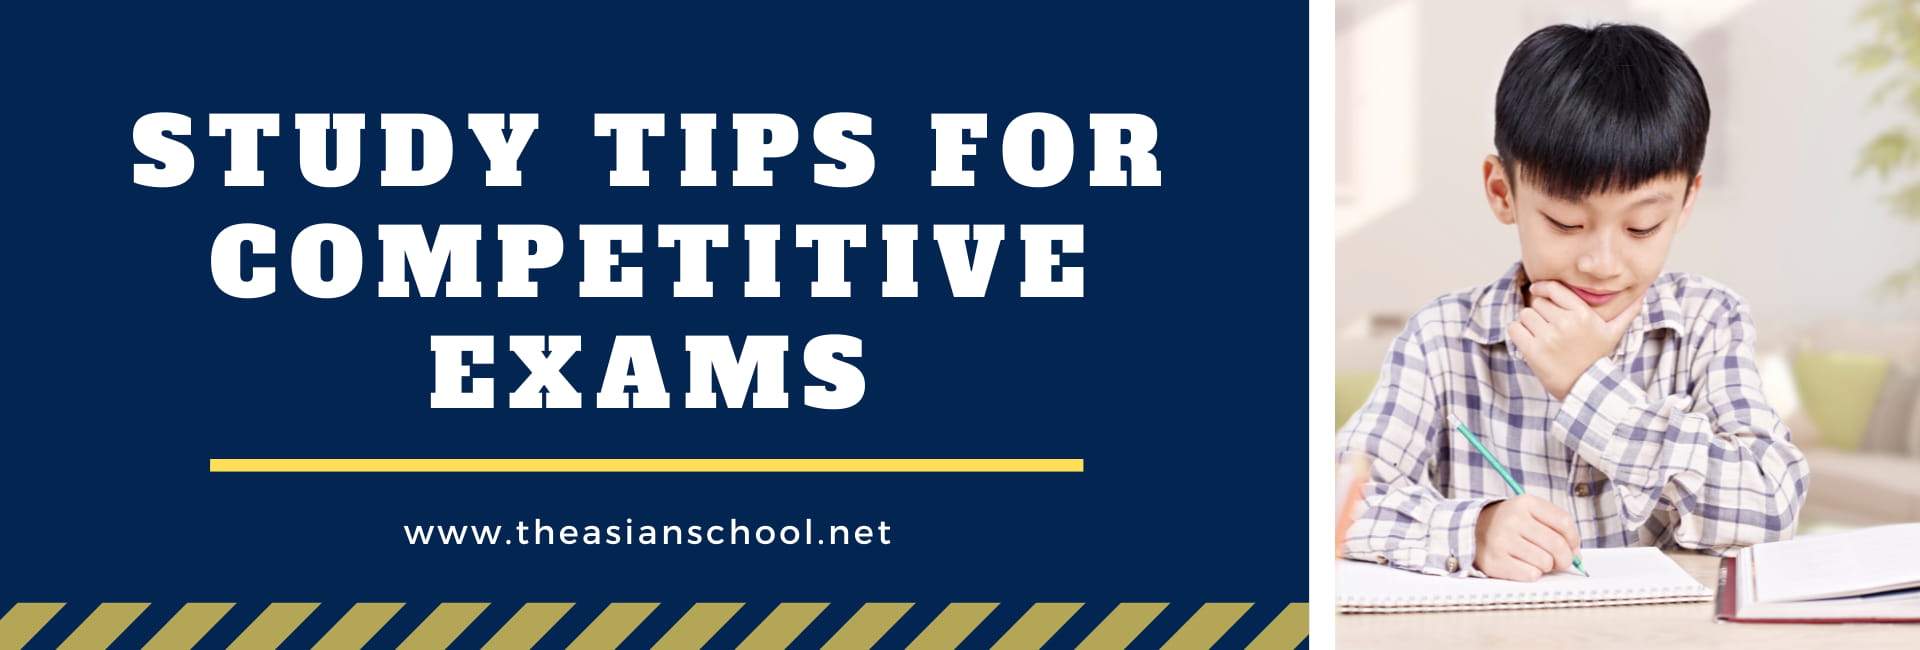 Study Tips For Competitive Exams